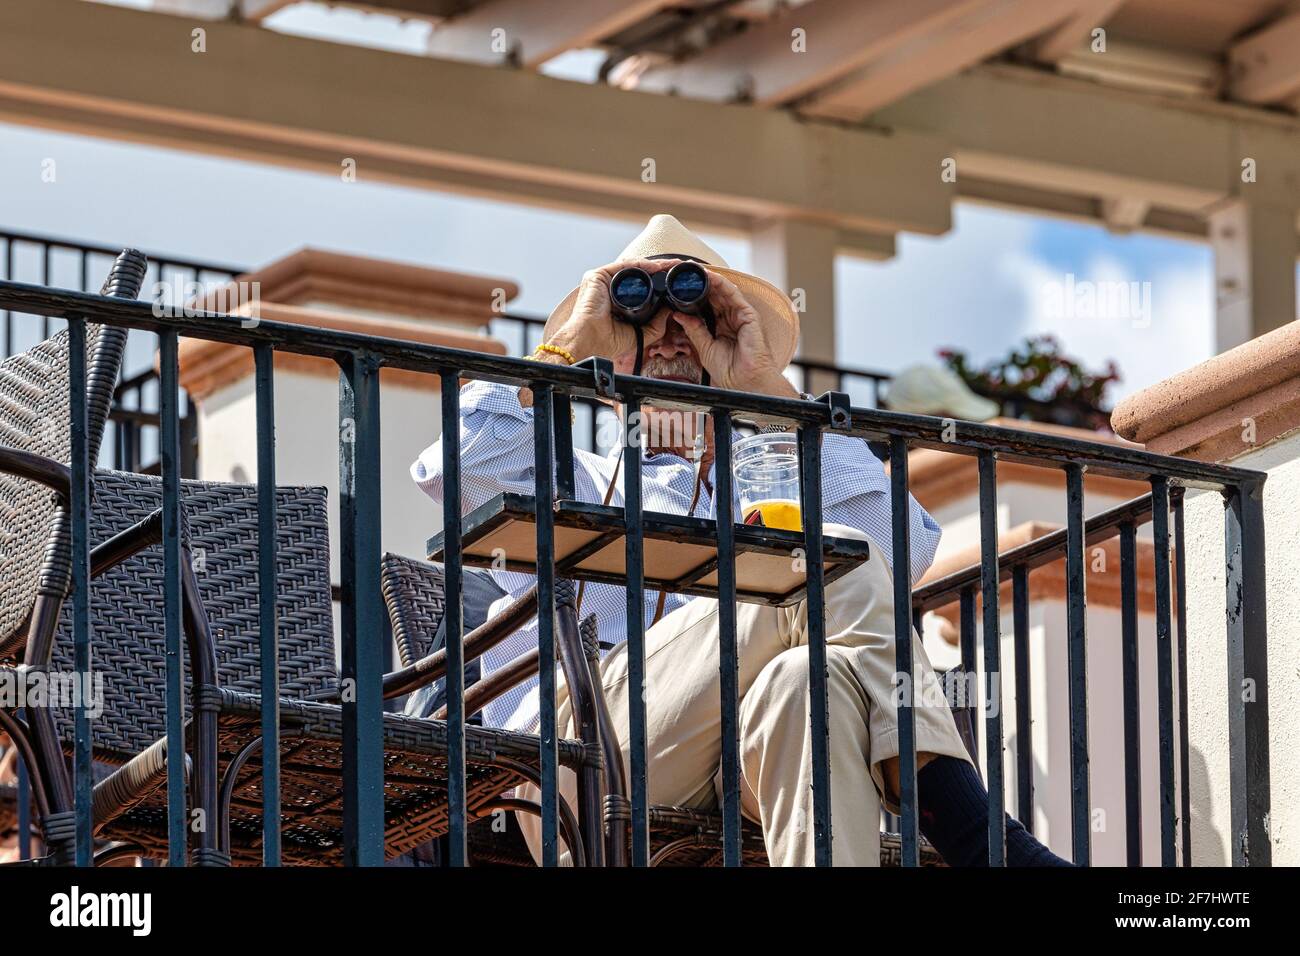 WEST PALM BEACH, FL - MARCH 14, 2021: Man with straw hat watching an event with his binoculars. Stock Photo